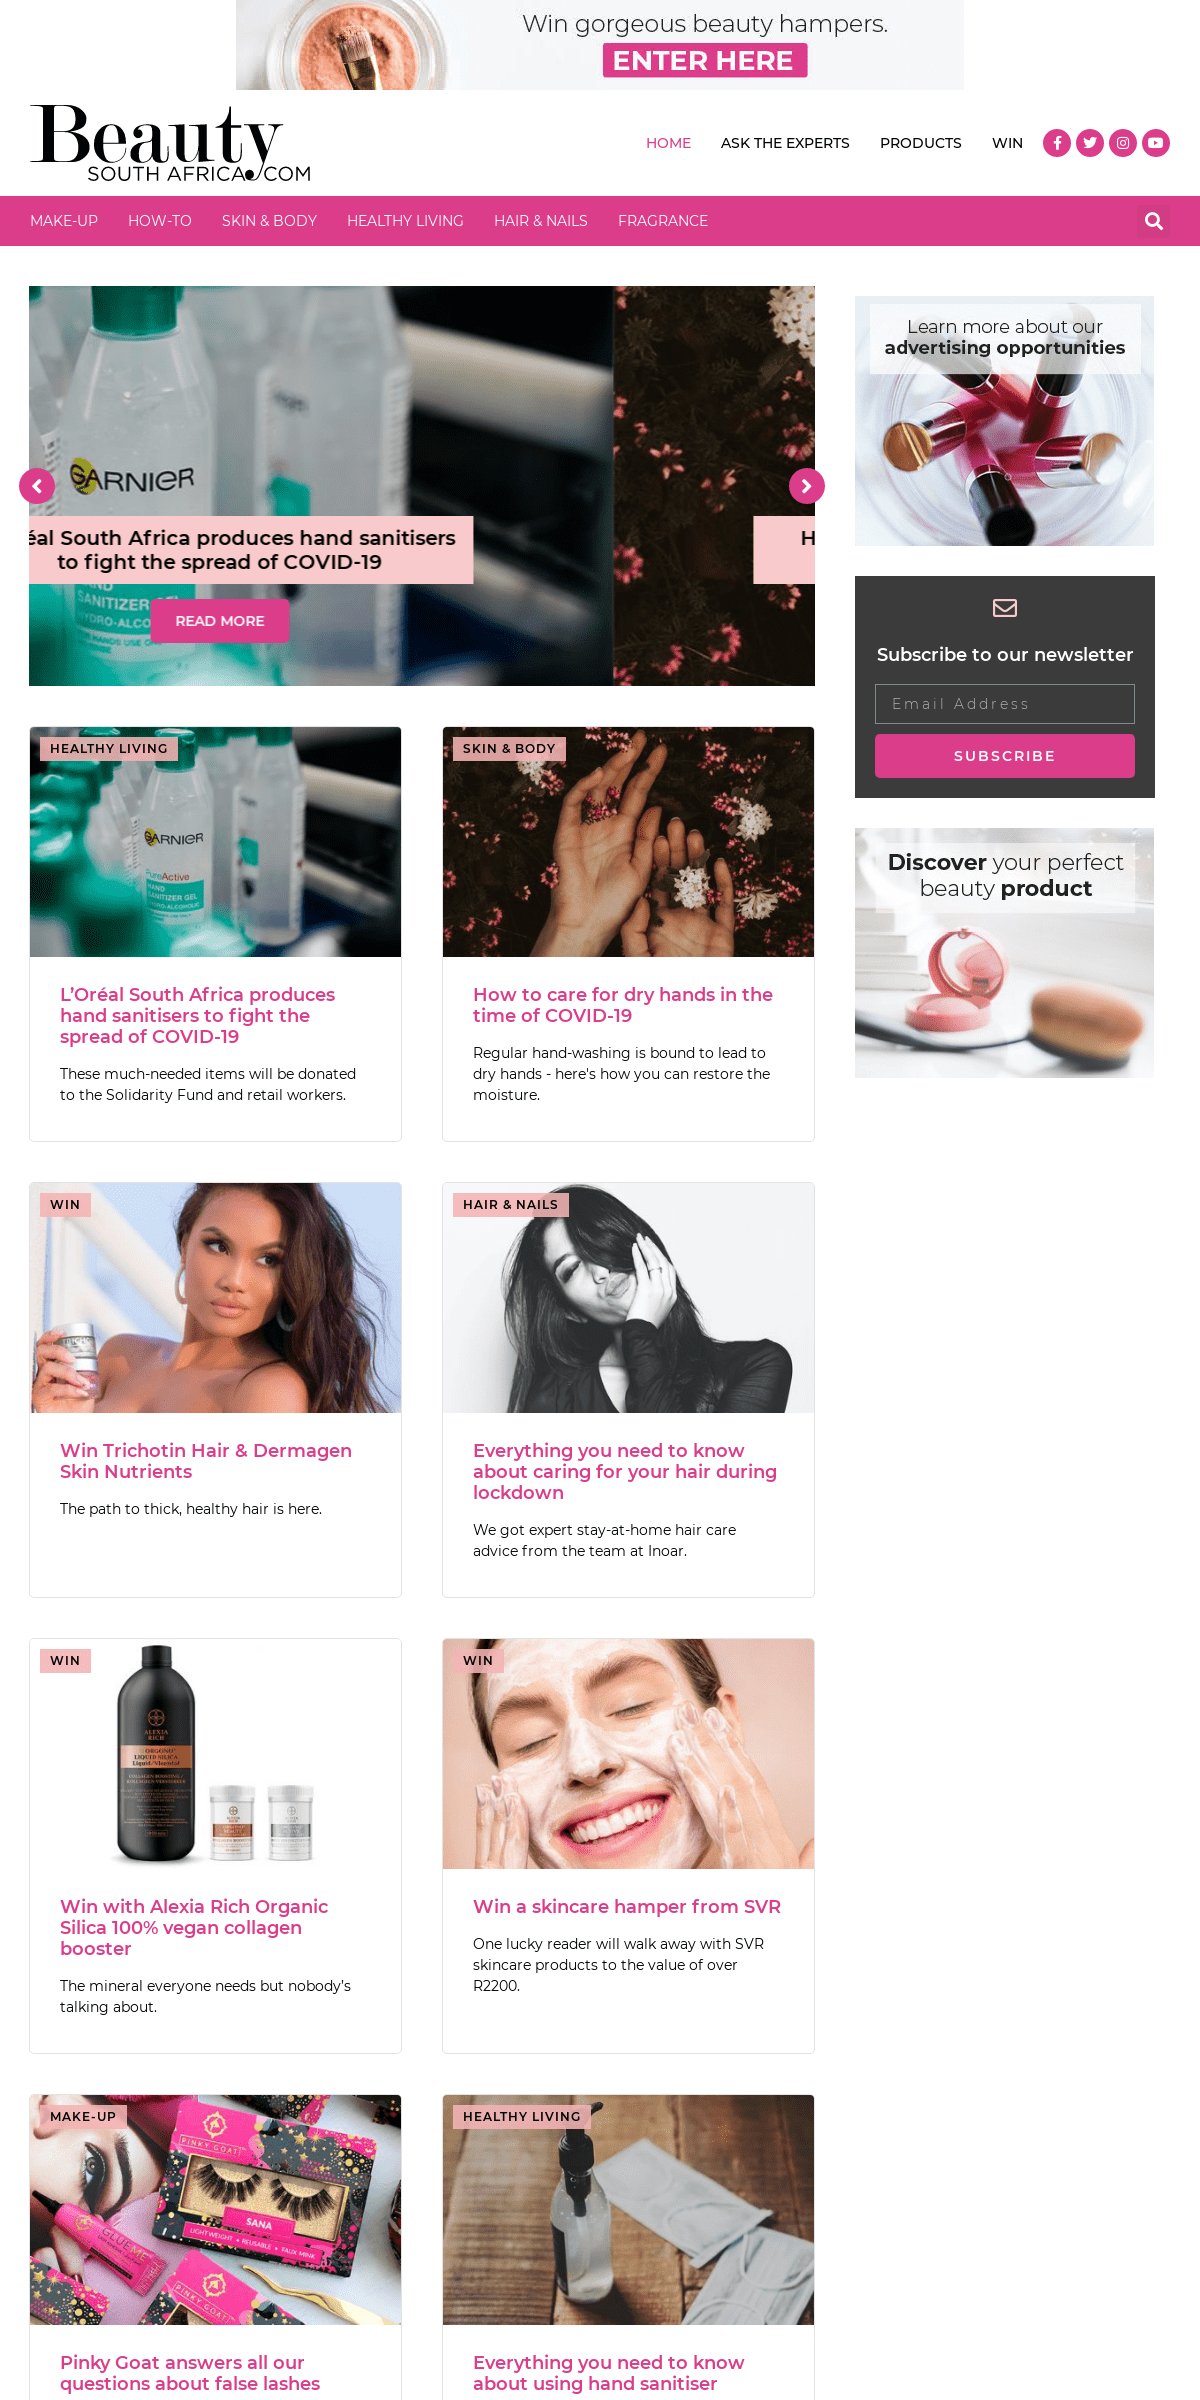 A complete backup of beautysouthafrica.com